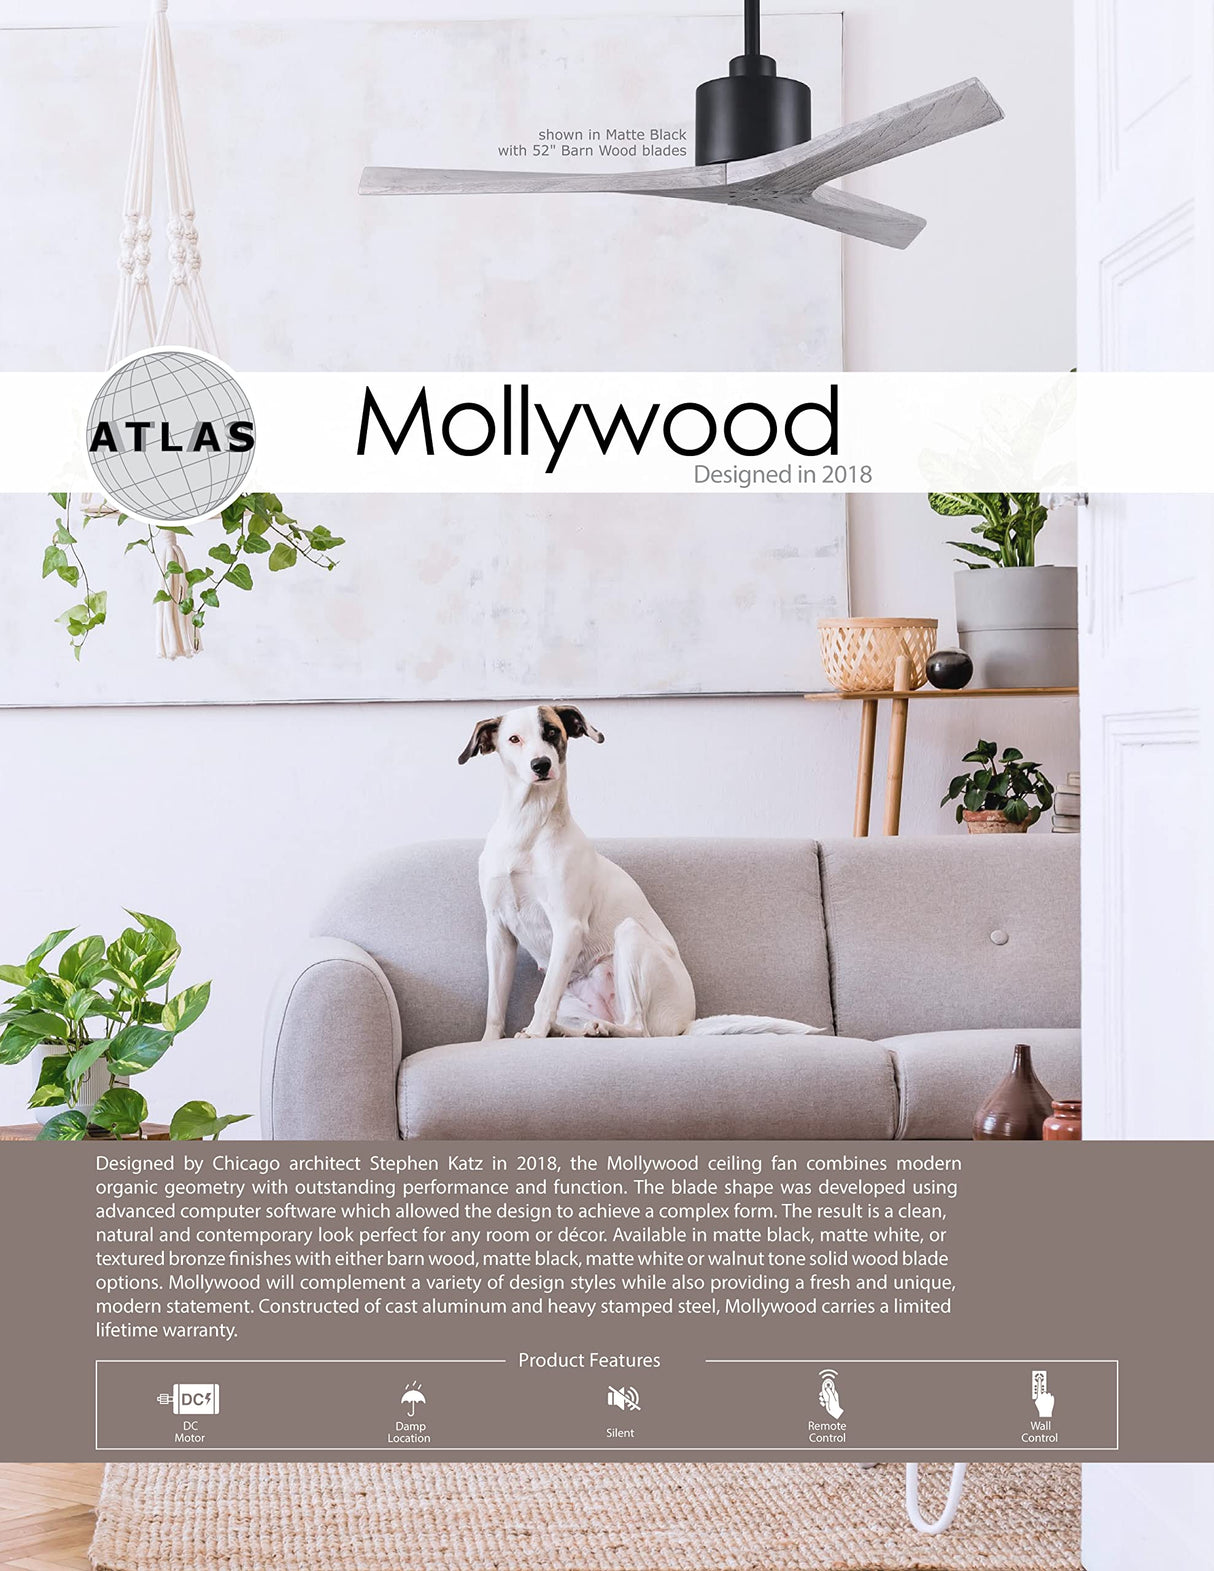 Matthews Fan MW-BRBR-MWH-52 Mollywood 6-speed contemporary ceiling fan in Brushed Brass finish with 52” solid matte white wood blades